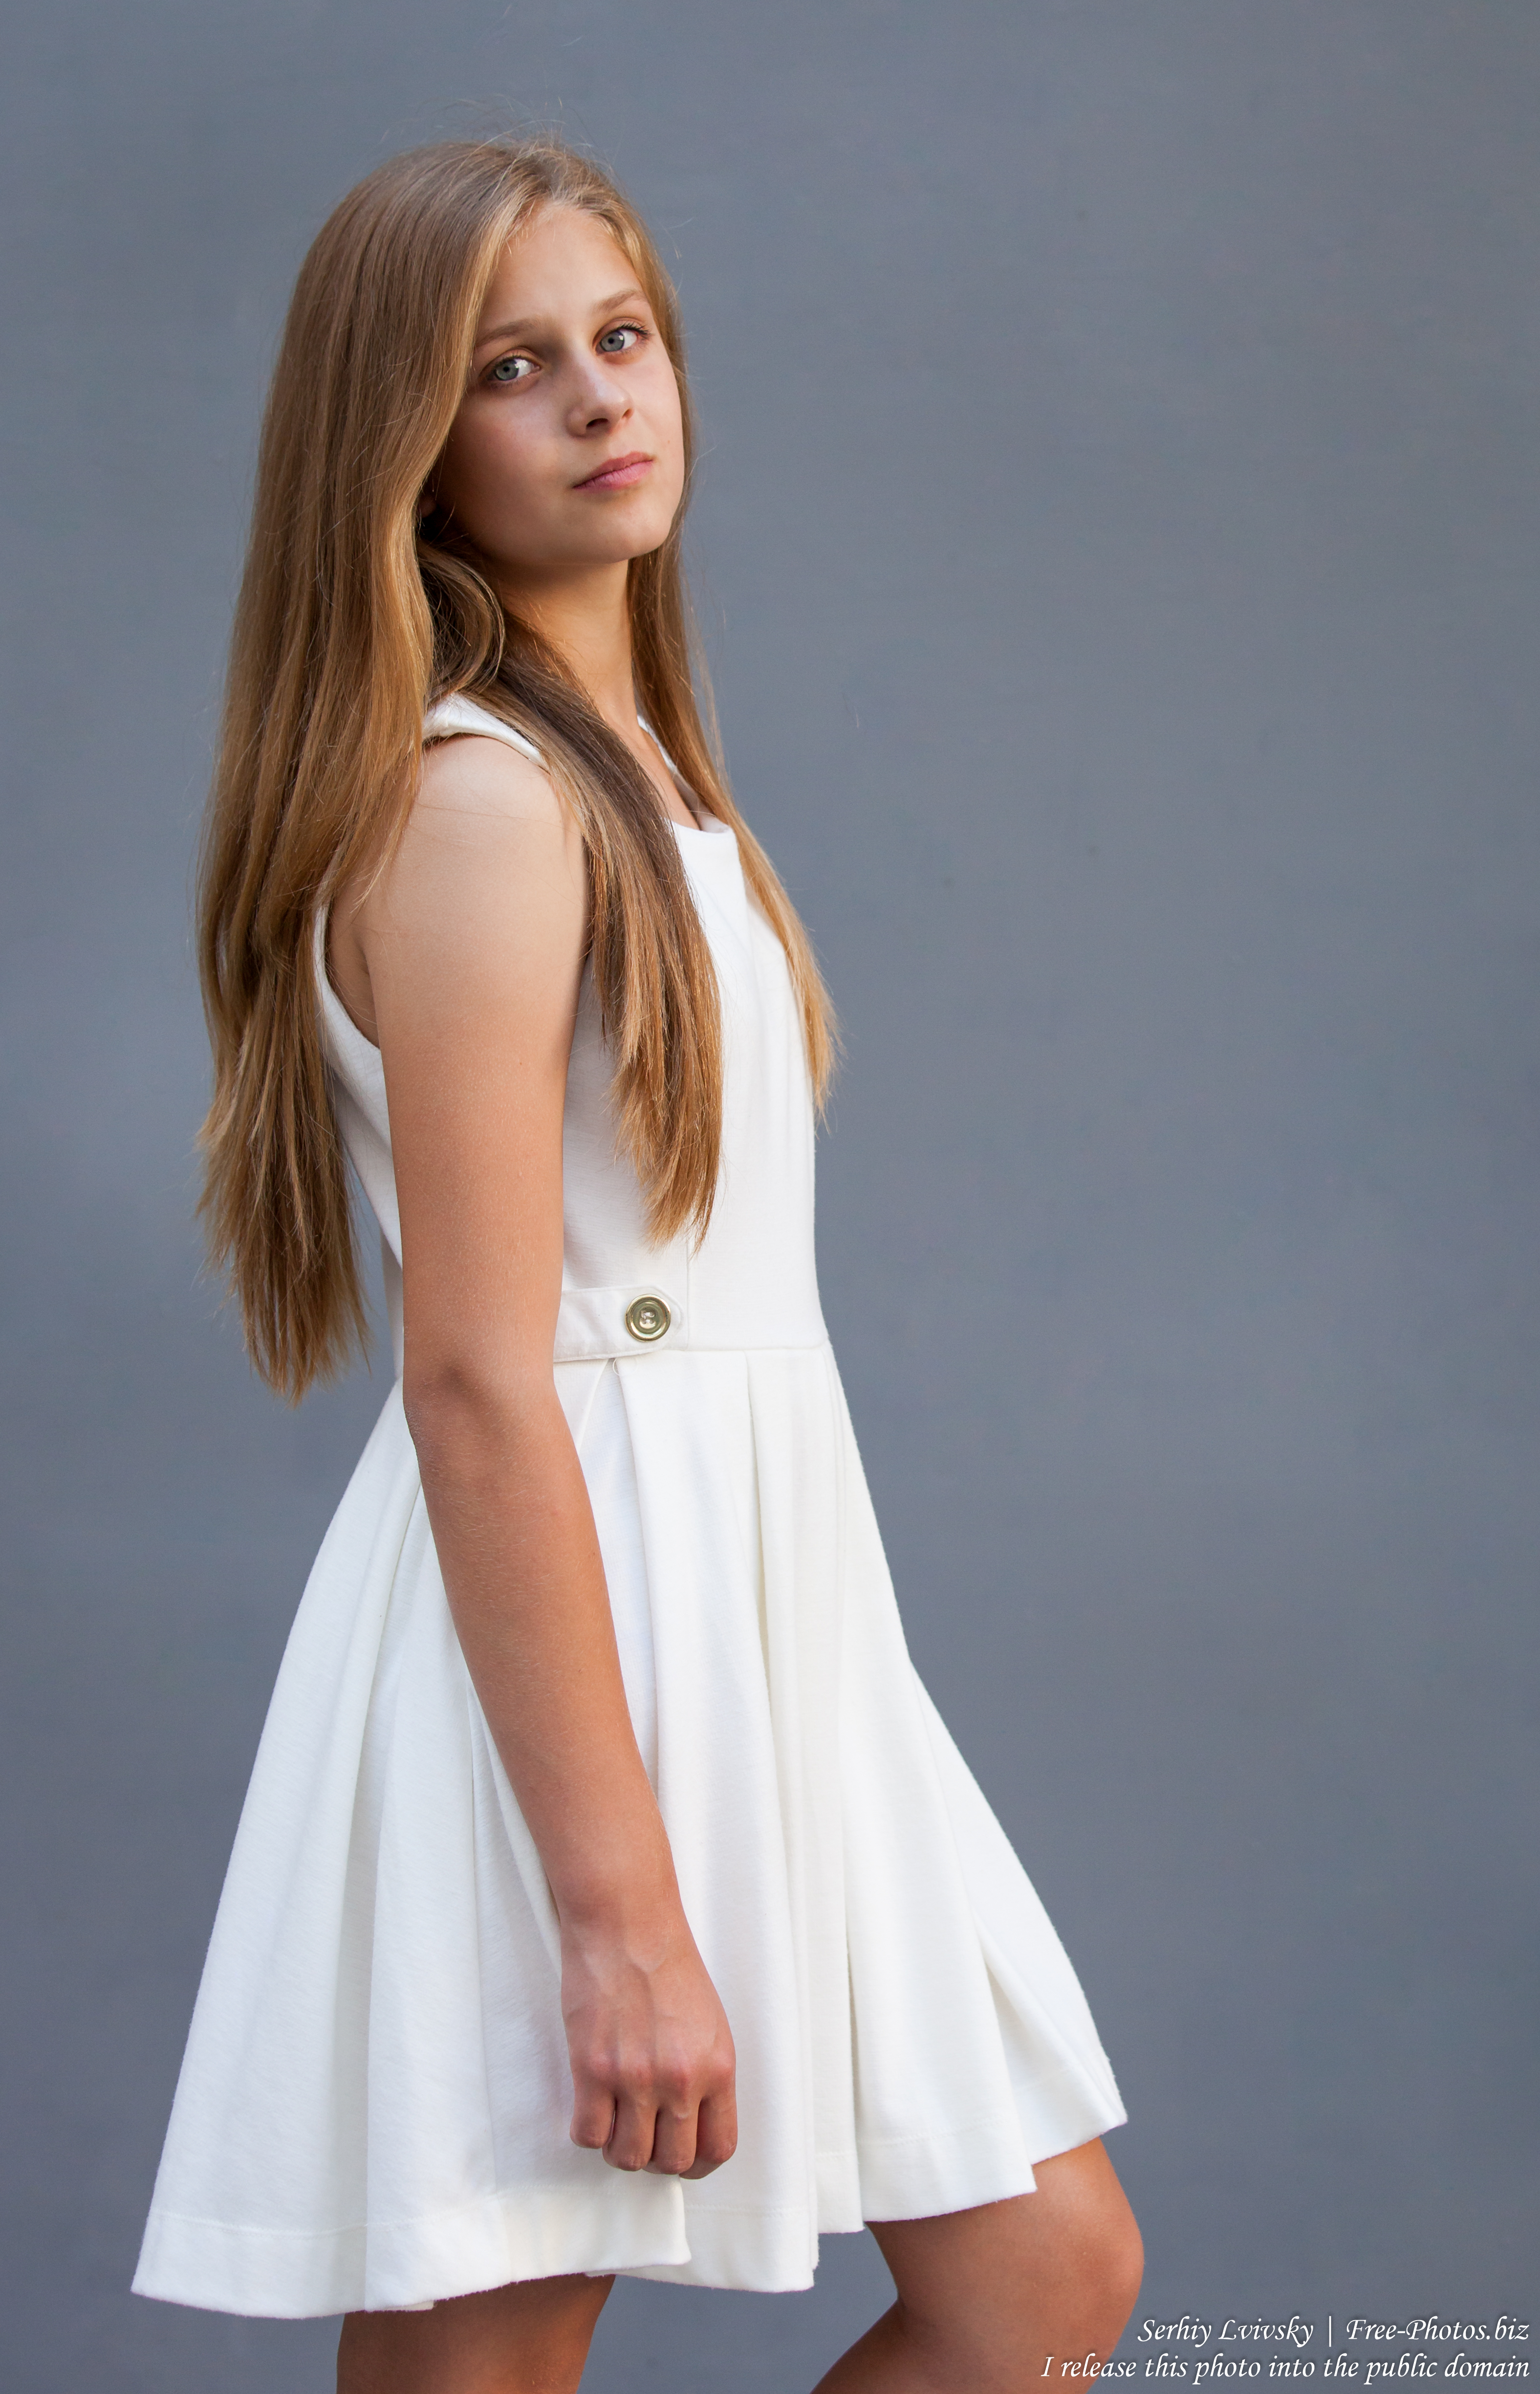 a 12-year-old blond girl wearing a white dress photographed in July 2015 by Serhiy Lvivsky, picture 11